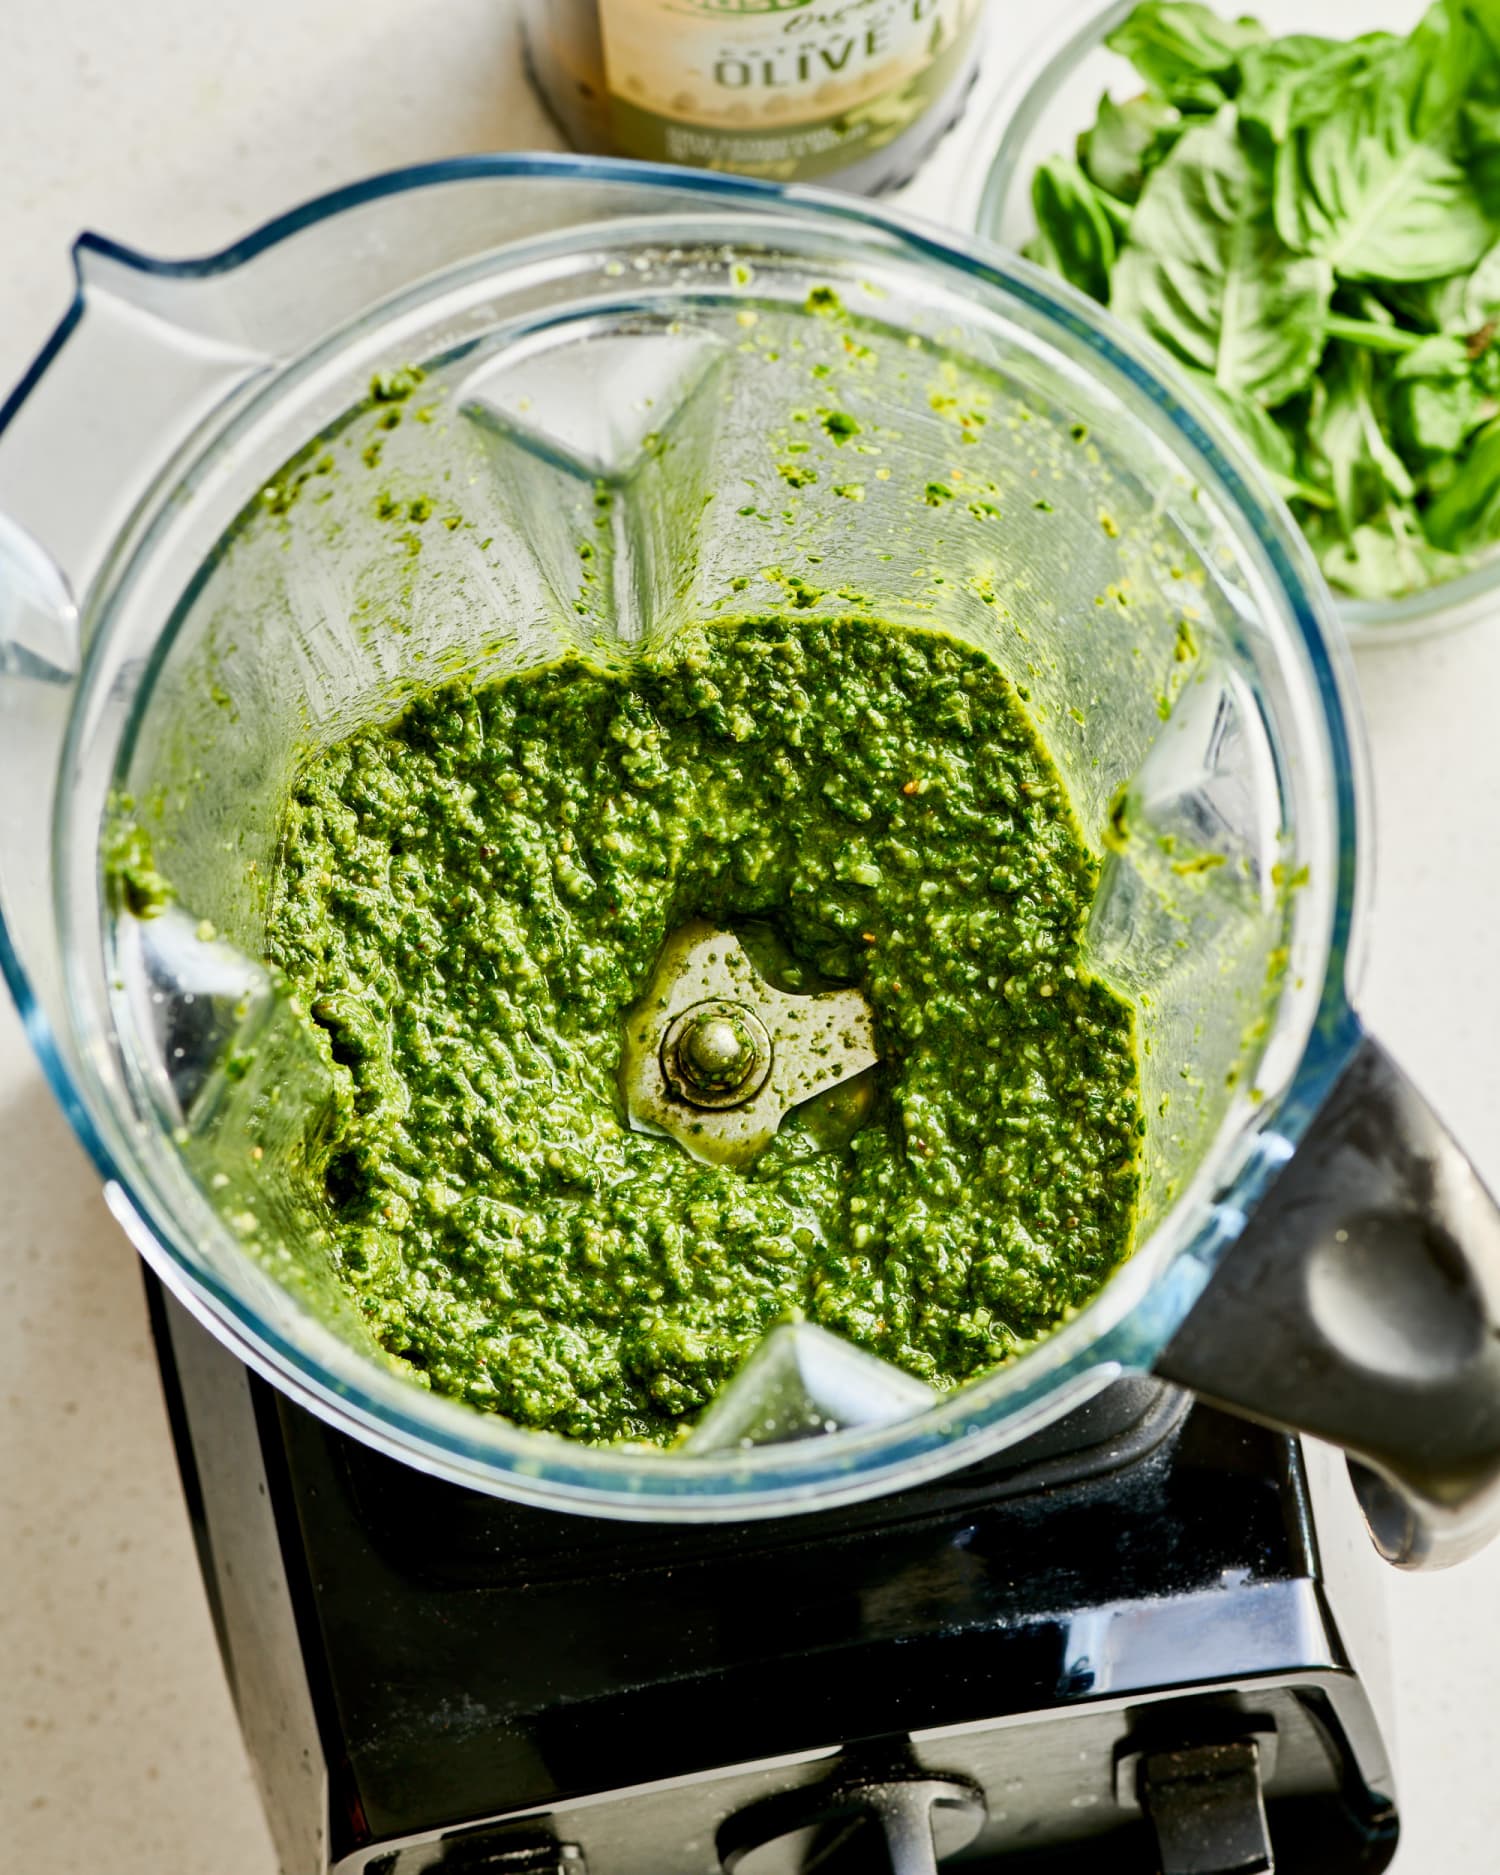 This Simple Step Will Keep Your Homemade Pesto Vibrantly Green Longer